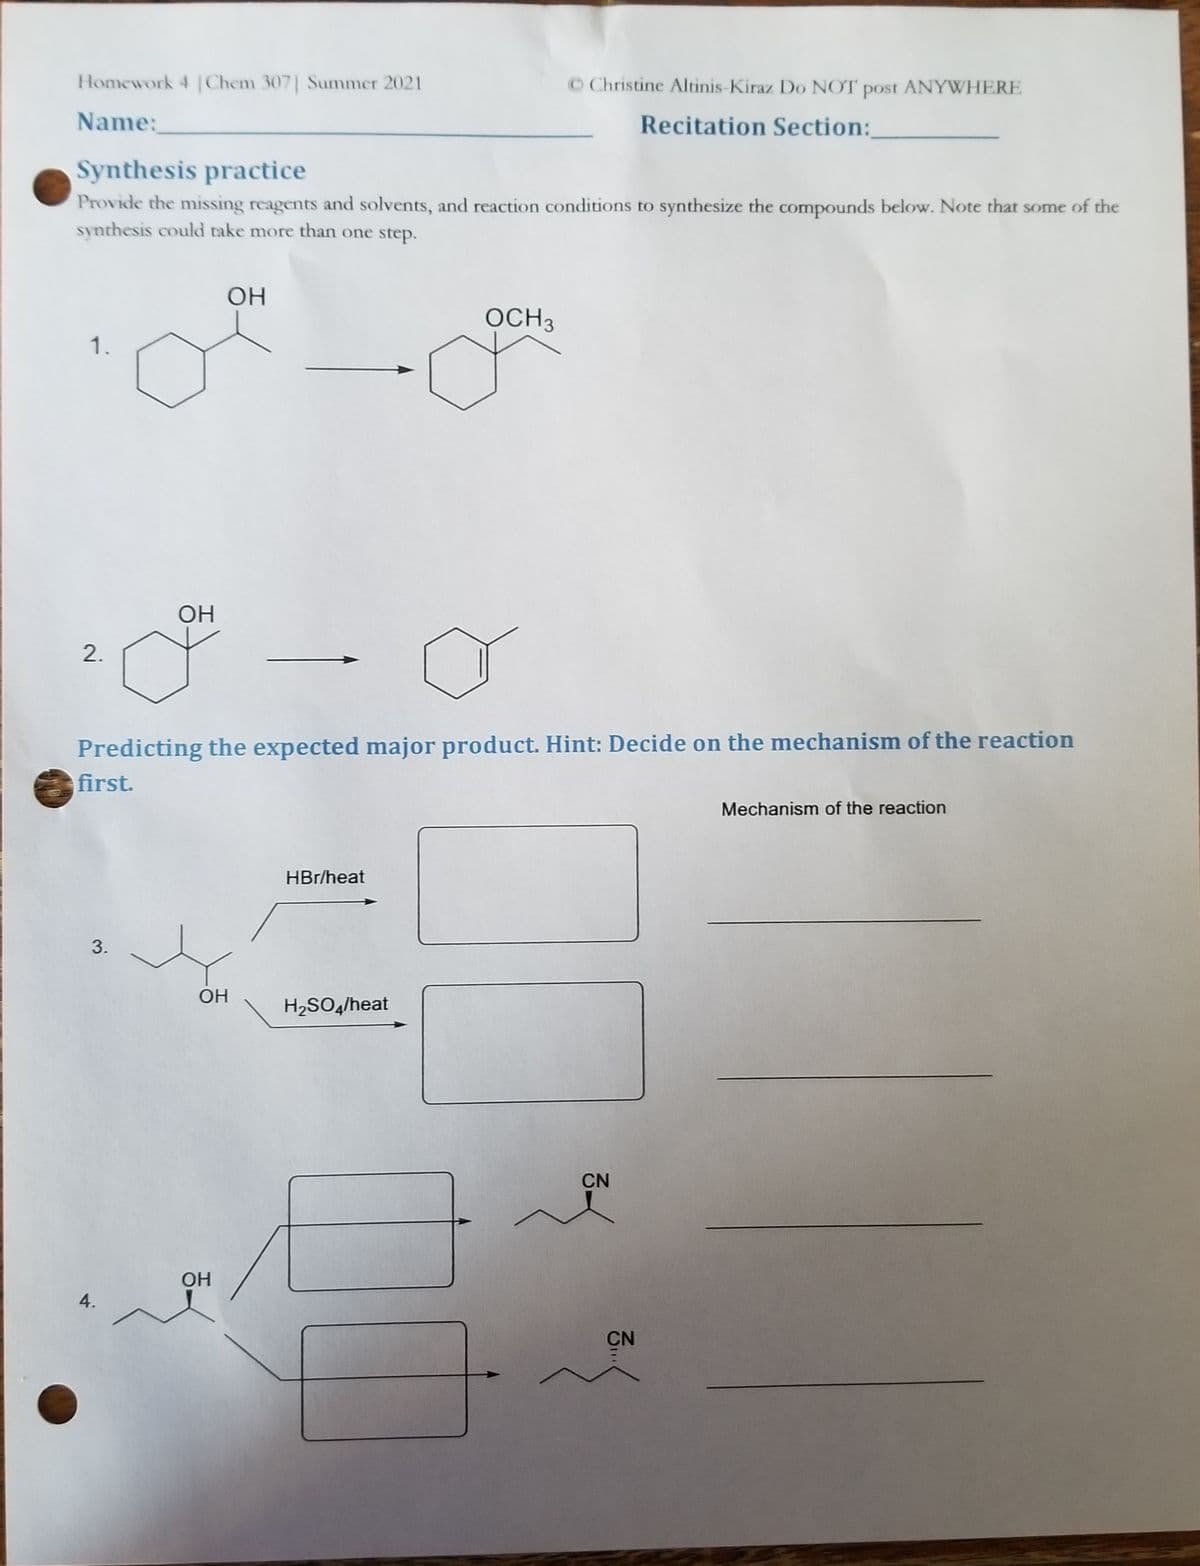 Homework 4 |Chem 307| Summer 2021
OChristine Altinis-Kiraz Do NOT post
ANYWHERE
Name:
Recitation Section:
Synthesis practice
Provide the missing reagents and solvents, and reaction conditions to synthesize the compounds below. Note that some of the
synthesis could take more than one step.
OH
OCH3
1.
OH
Predicting the expected major product. Hint: Decide on the mechanism of the reaction
first.
Mechanism of the reaction
HBr/heat
OH
H2SO4/heat
CN
OH
4.
CN
2.
3.
